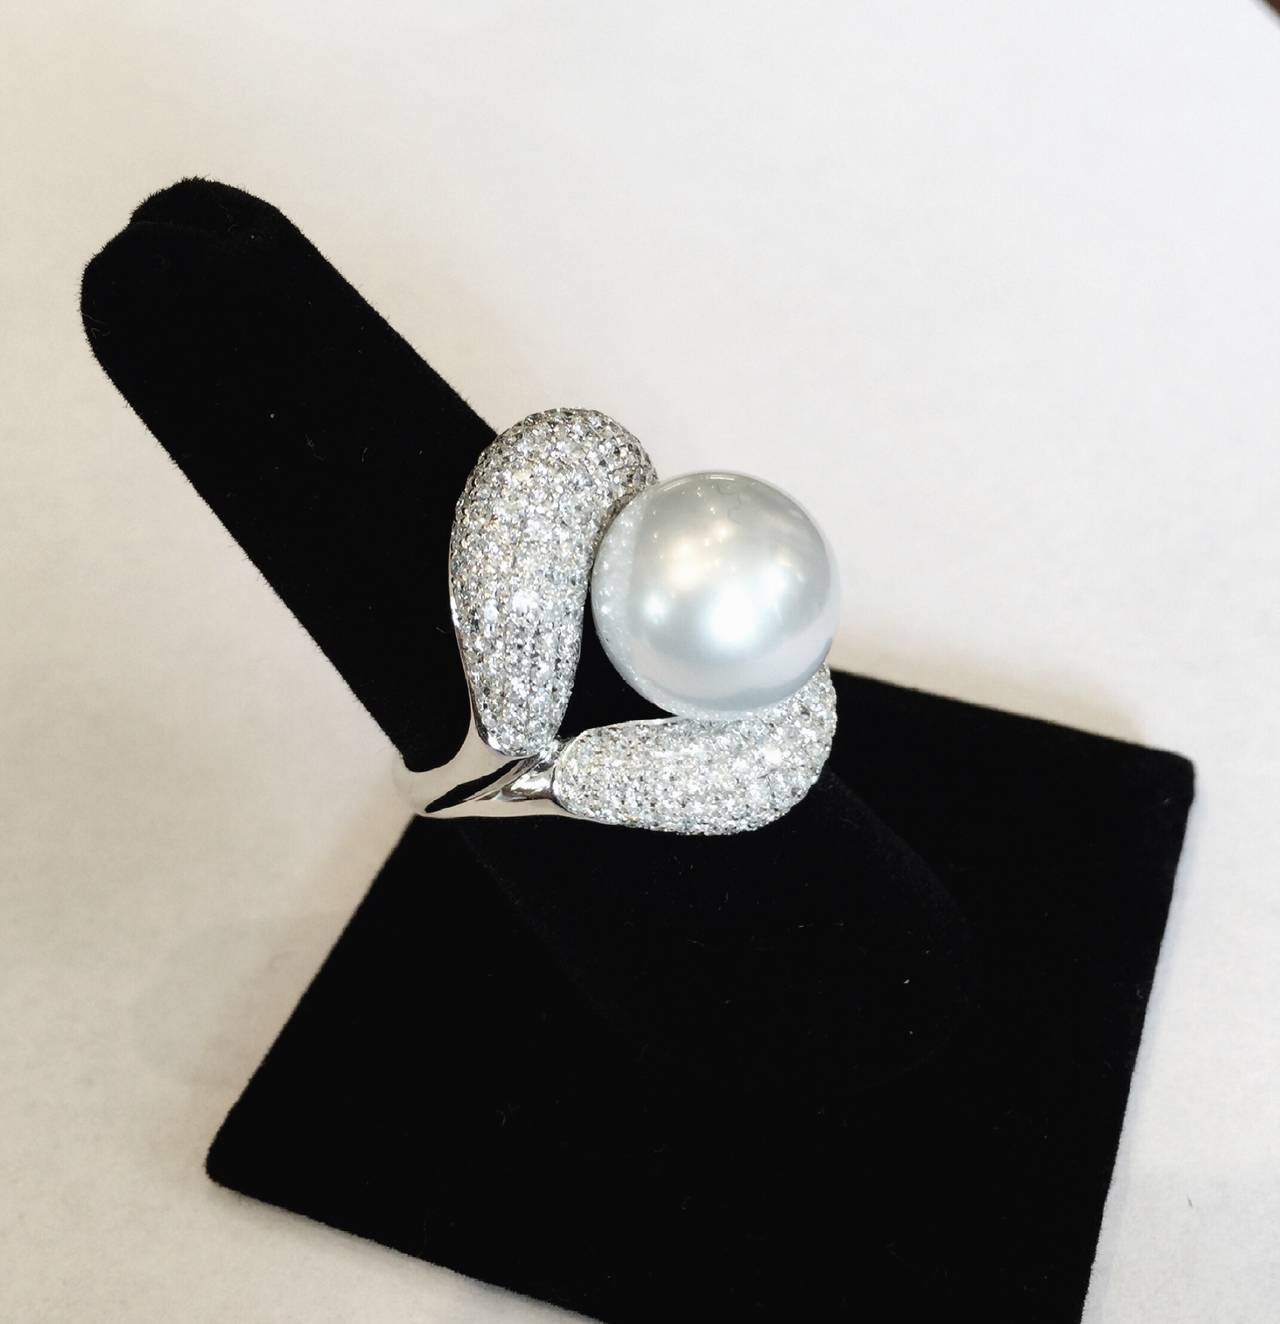 Fabulous cultured, silvery white, 13.50mm round south sea pearl with perfect skins and wonderful lustre.  There are 224 diamonds that make up the 3.00cts of pavé diamonds in the ring. The ring is in 18k white gold.